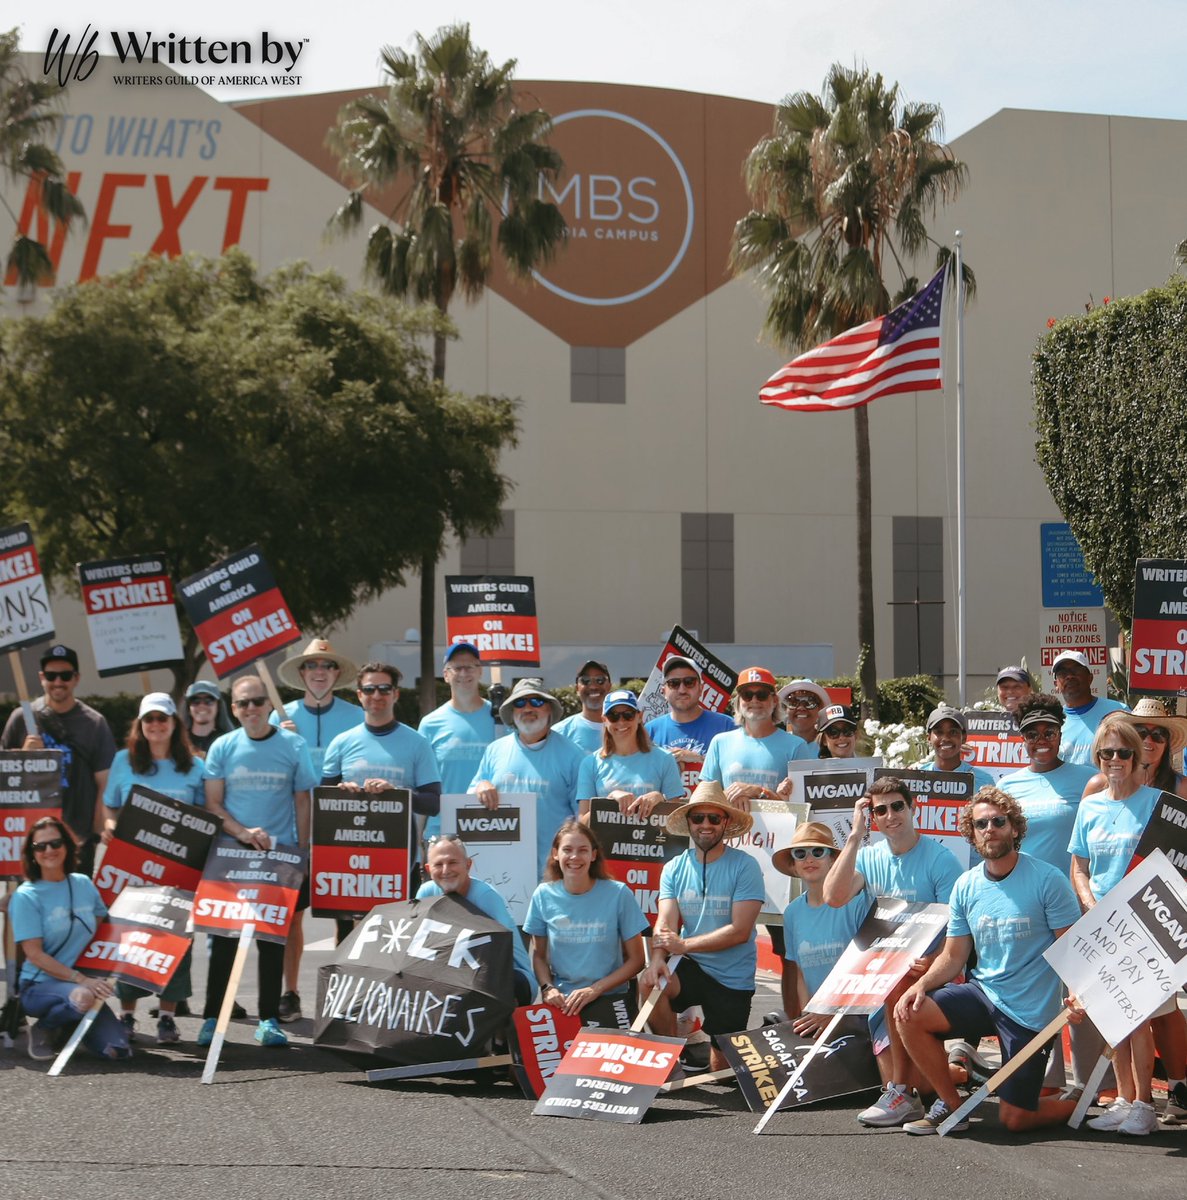 “There aren’t many picket lines where the entire picket could go get lunch together,” Amazon lot captain Nick Geisler. Read the full story: writtenby.com/recollections-…. #WrittenBy